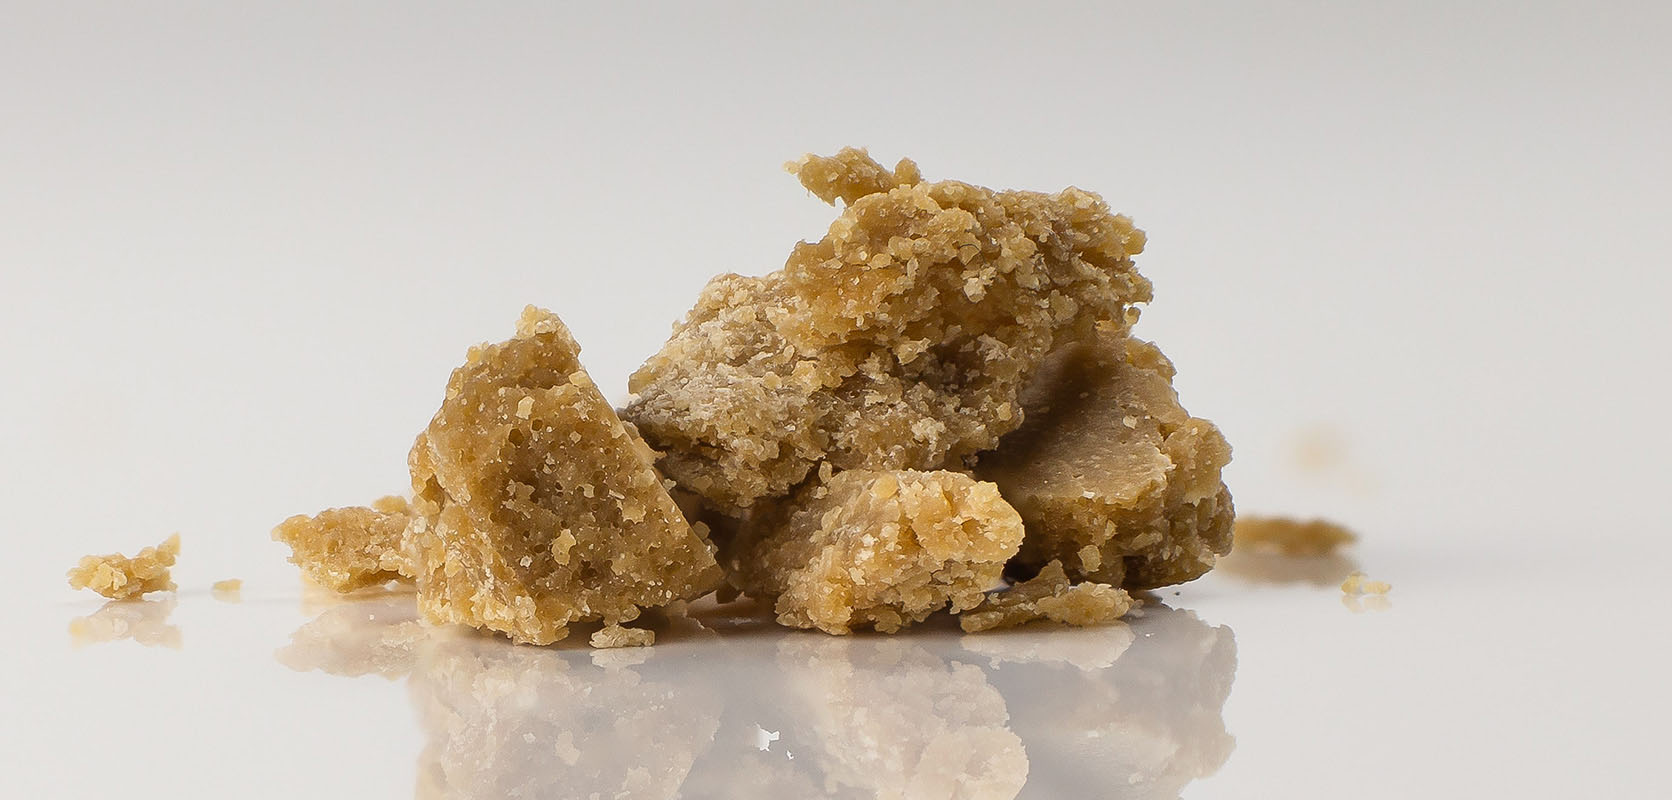 Crumble THC concentrate for sale online in Canada at Low Price Bud dispensary for cannabis concentrates. buy cannabis concentrates online canada. dab weed. 